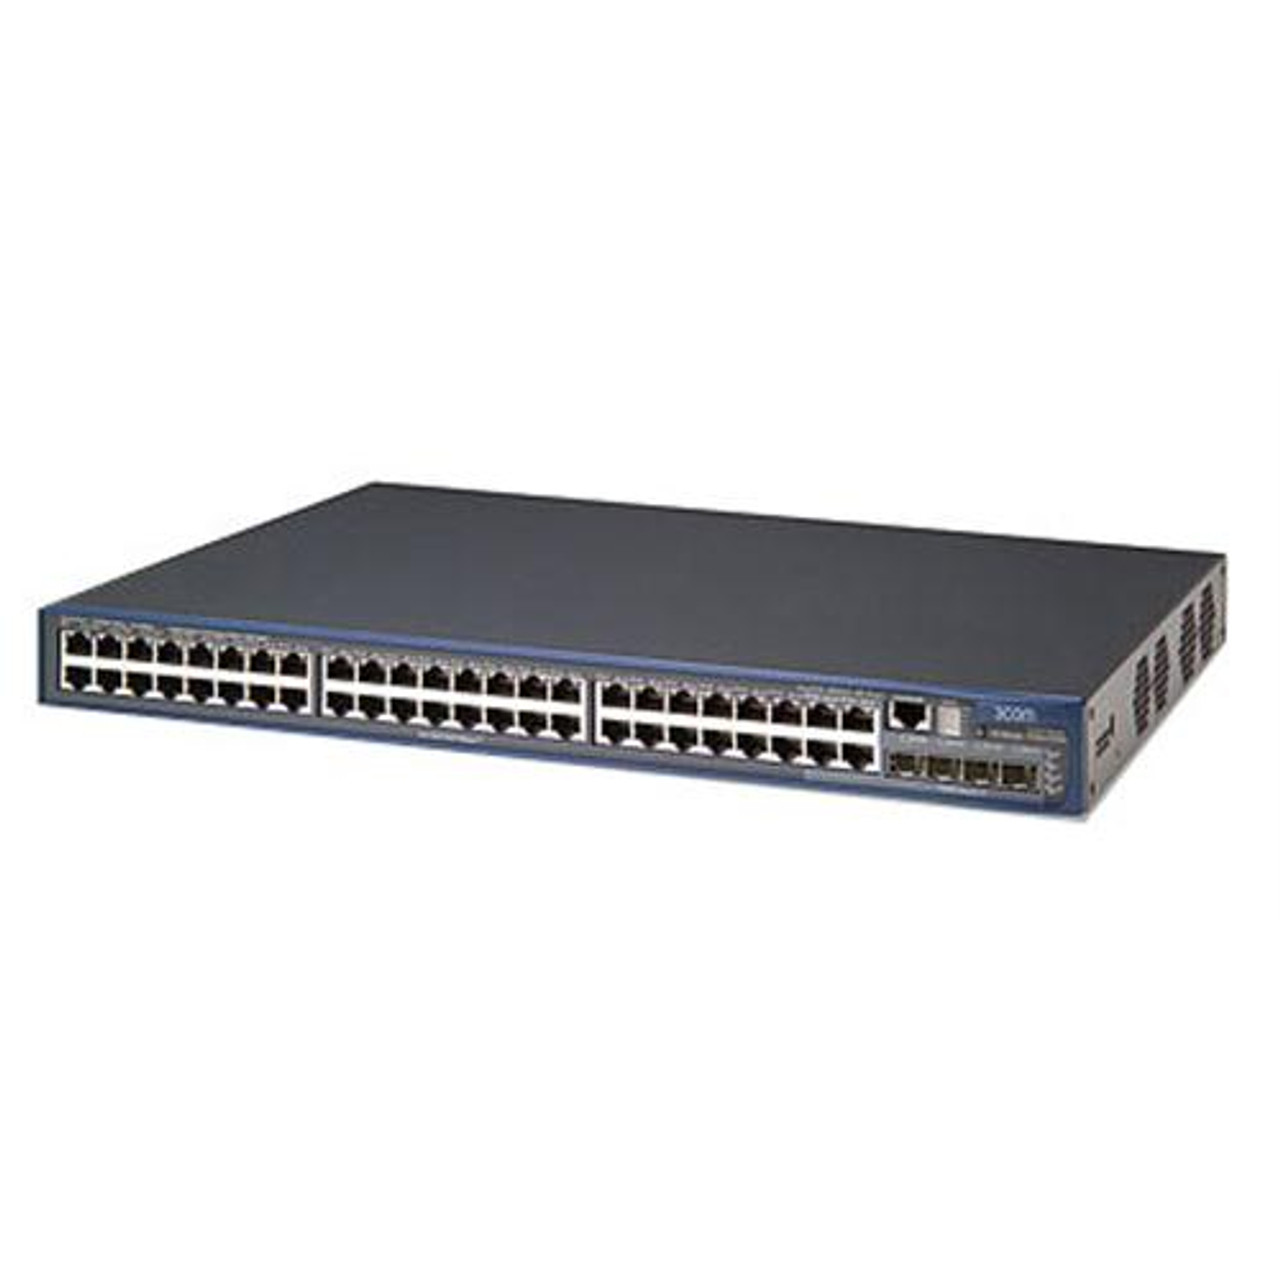 JD010A HP ProCurve E4800-48G 48-Ports Layer-4 Managed Stackable Gigabit Ethernet Switch with 4 x SFP (mini-GBIC) (Refurbished)